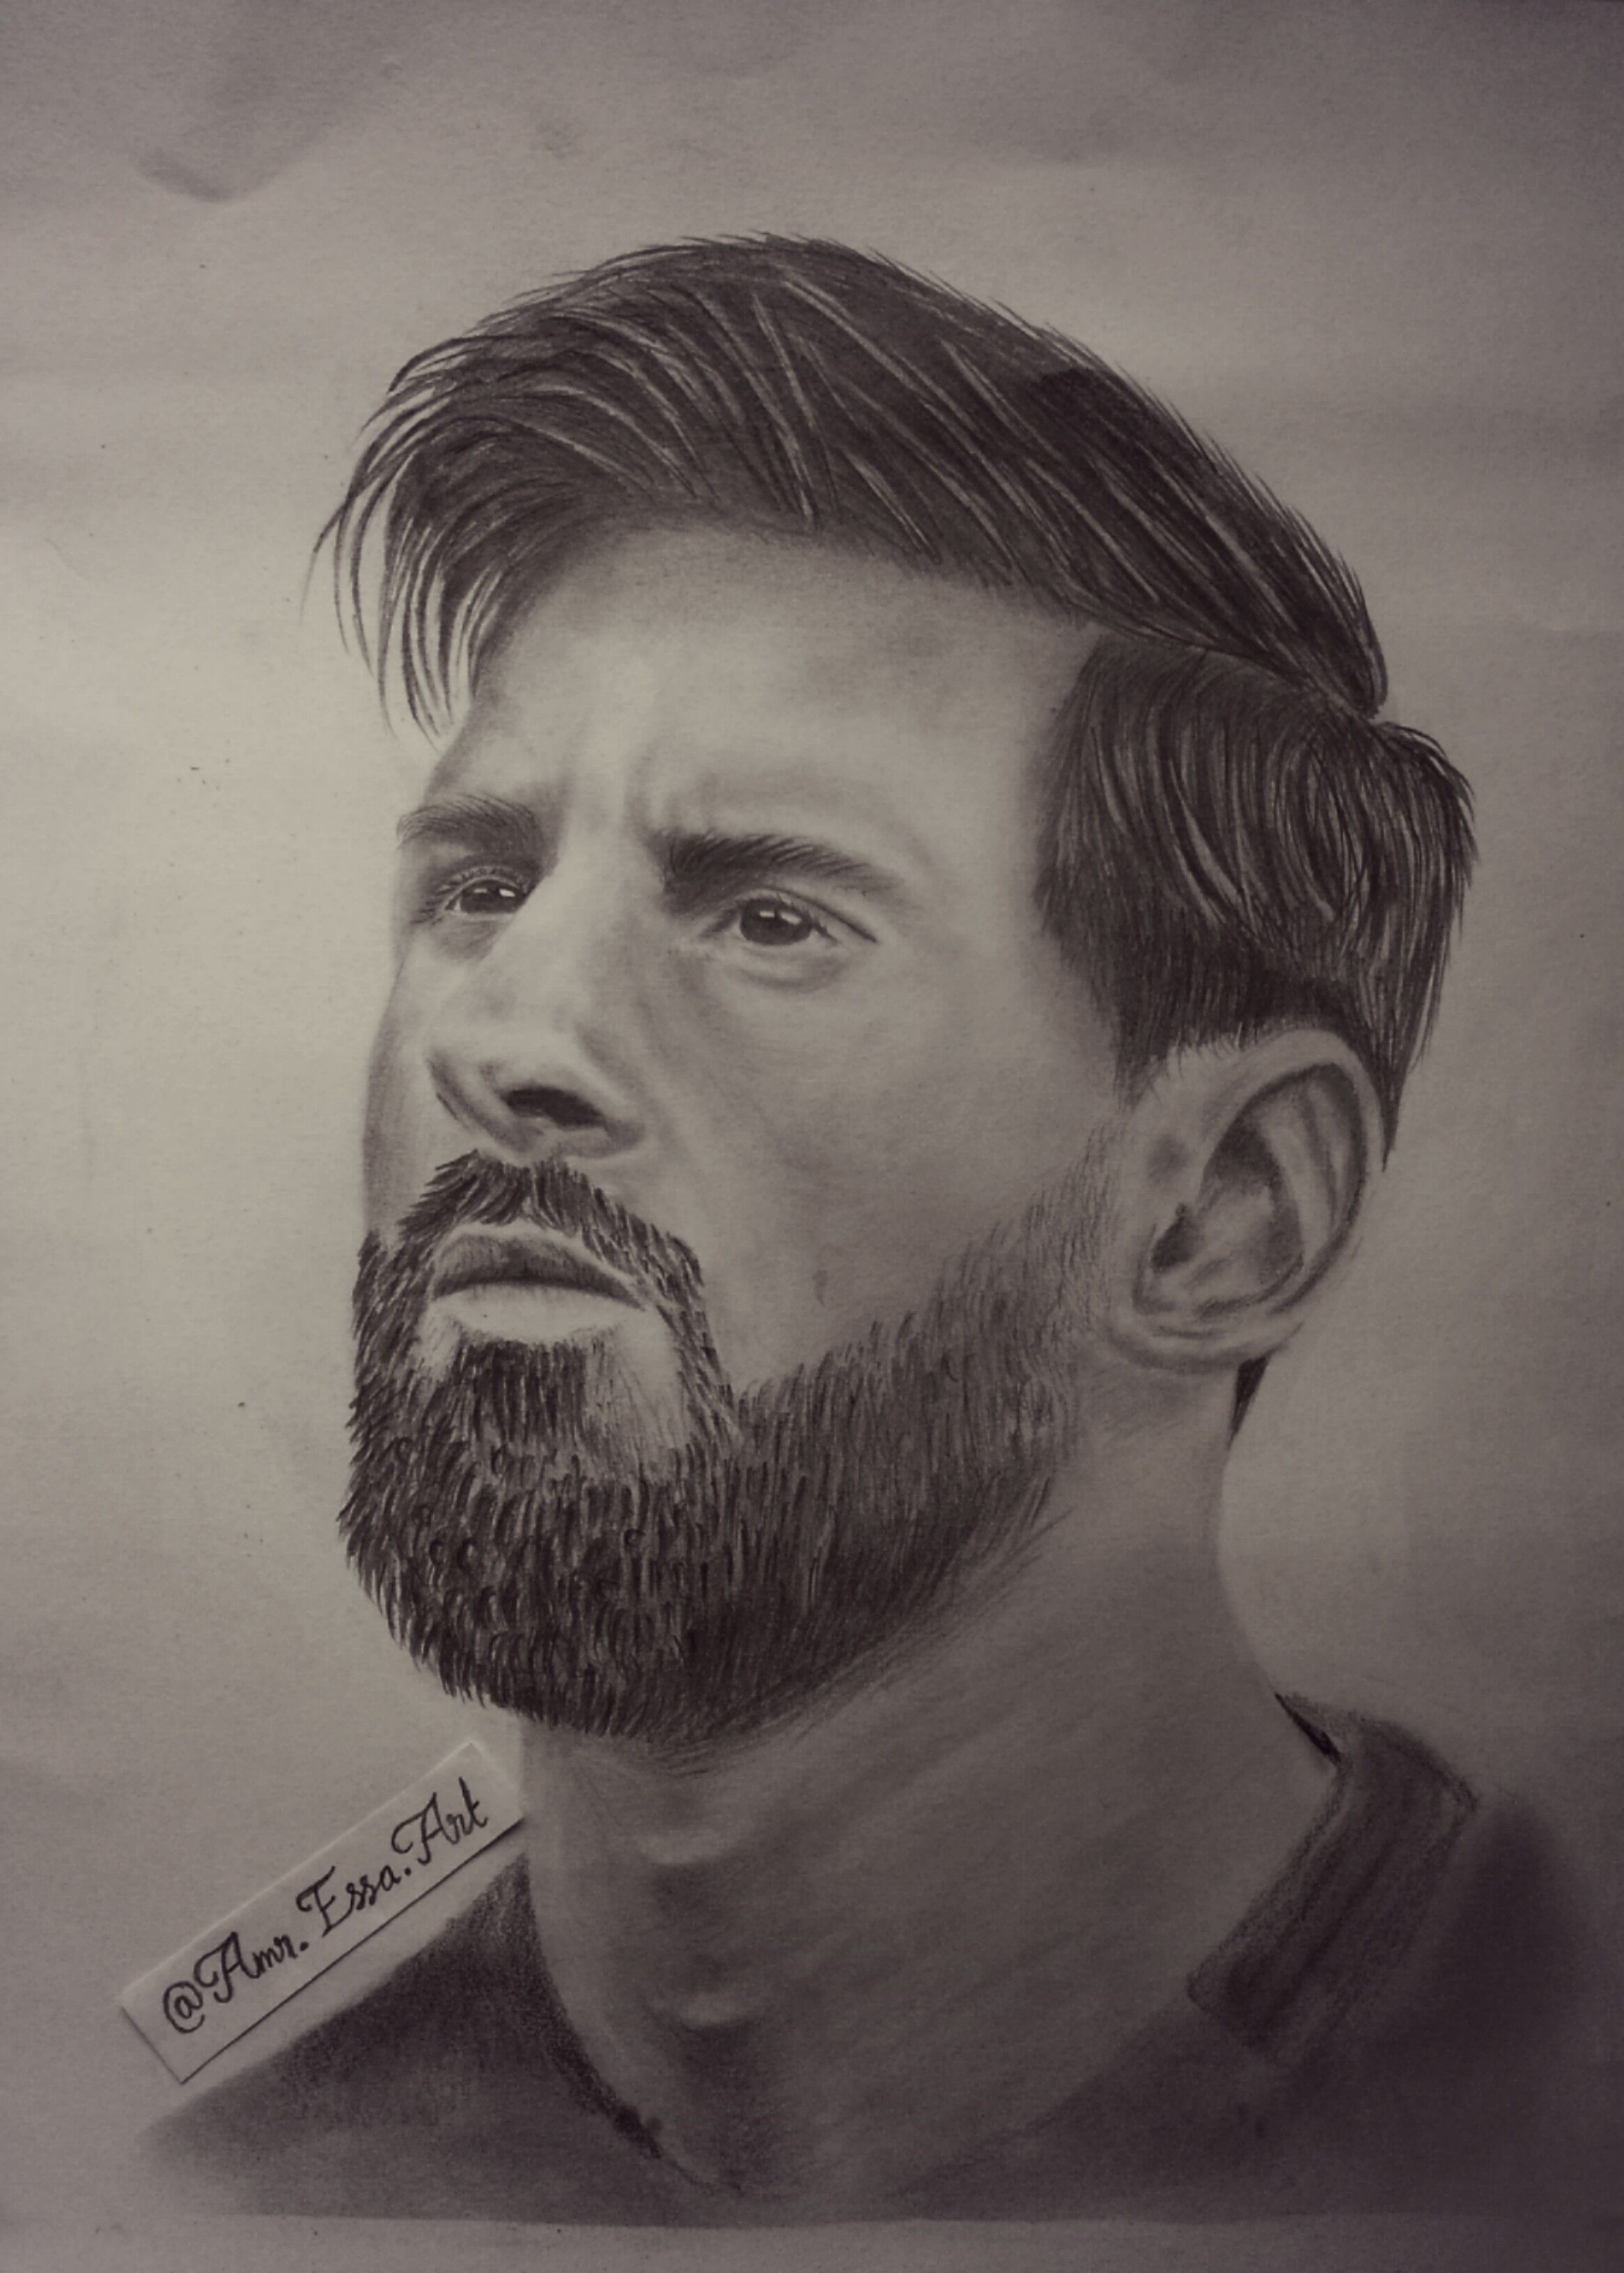 Leo Messi Drawings for Sale - Fine Art America